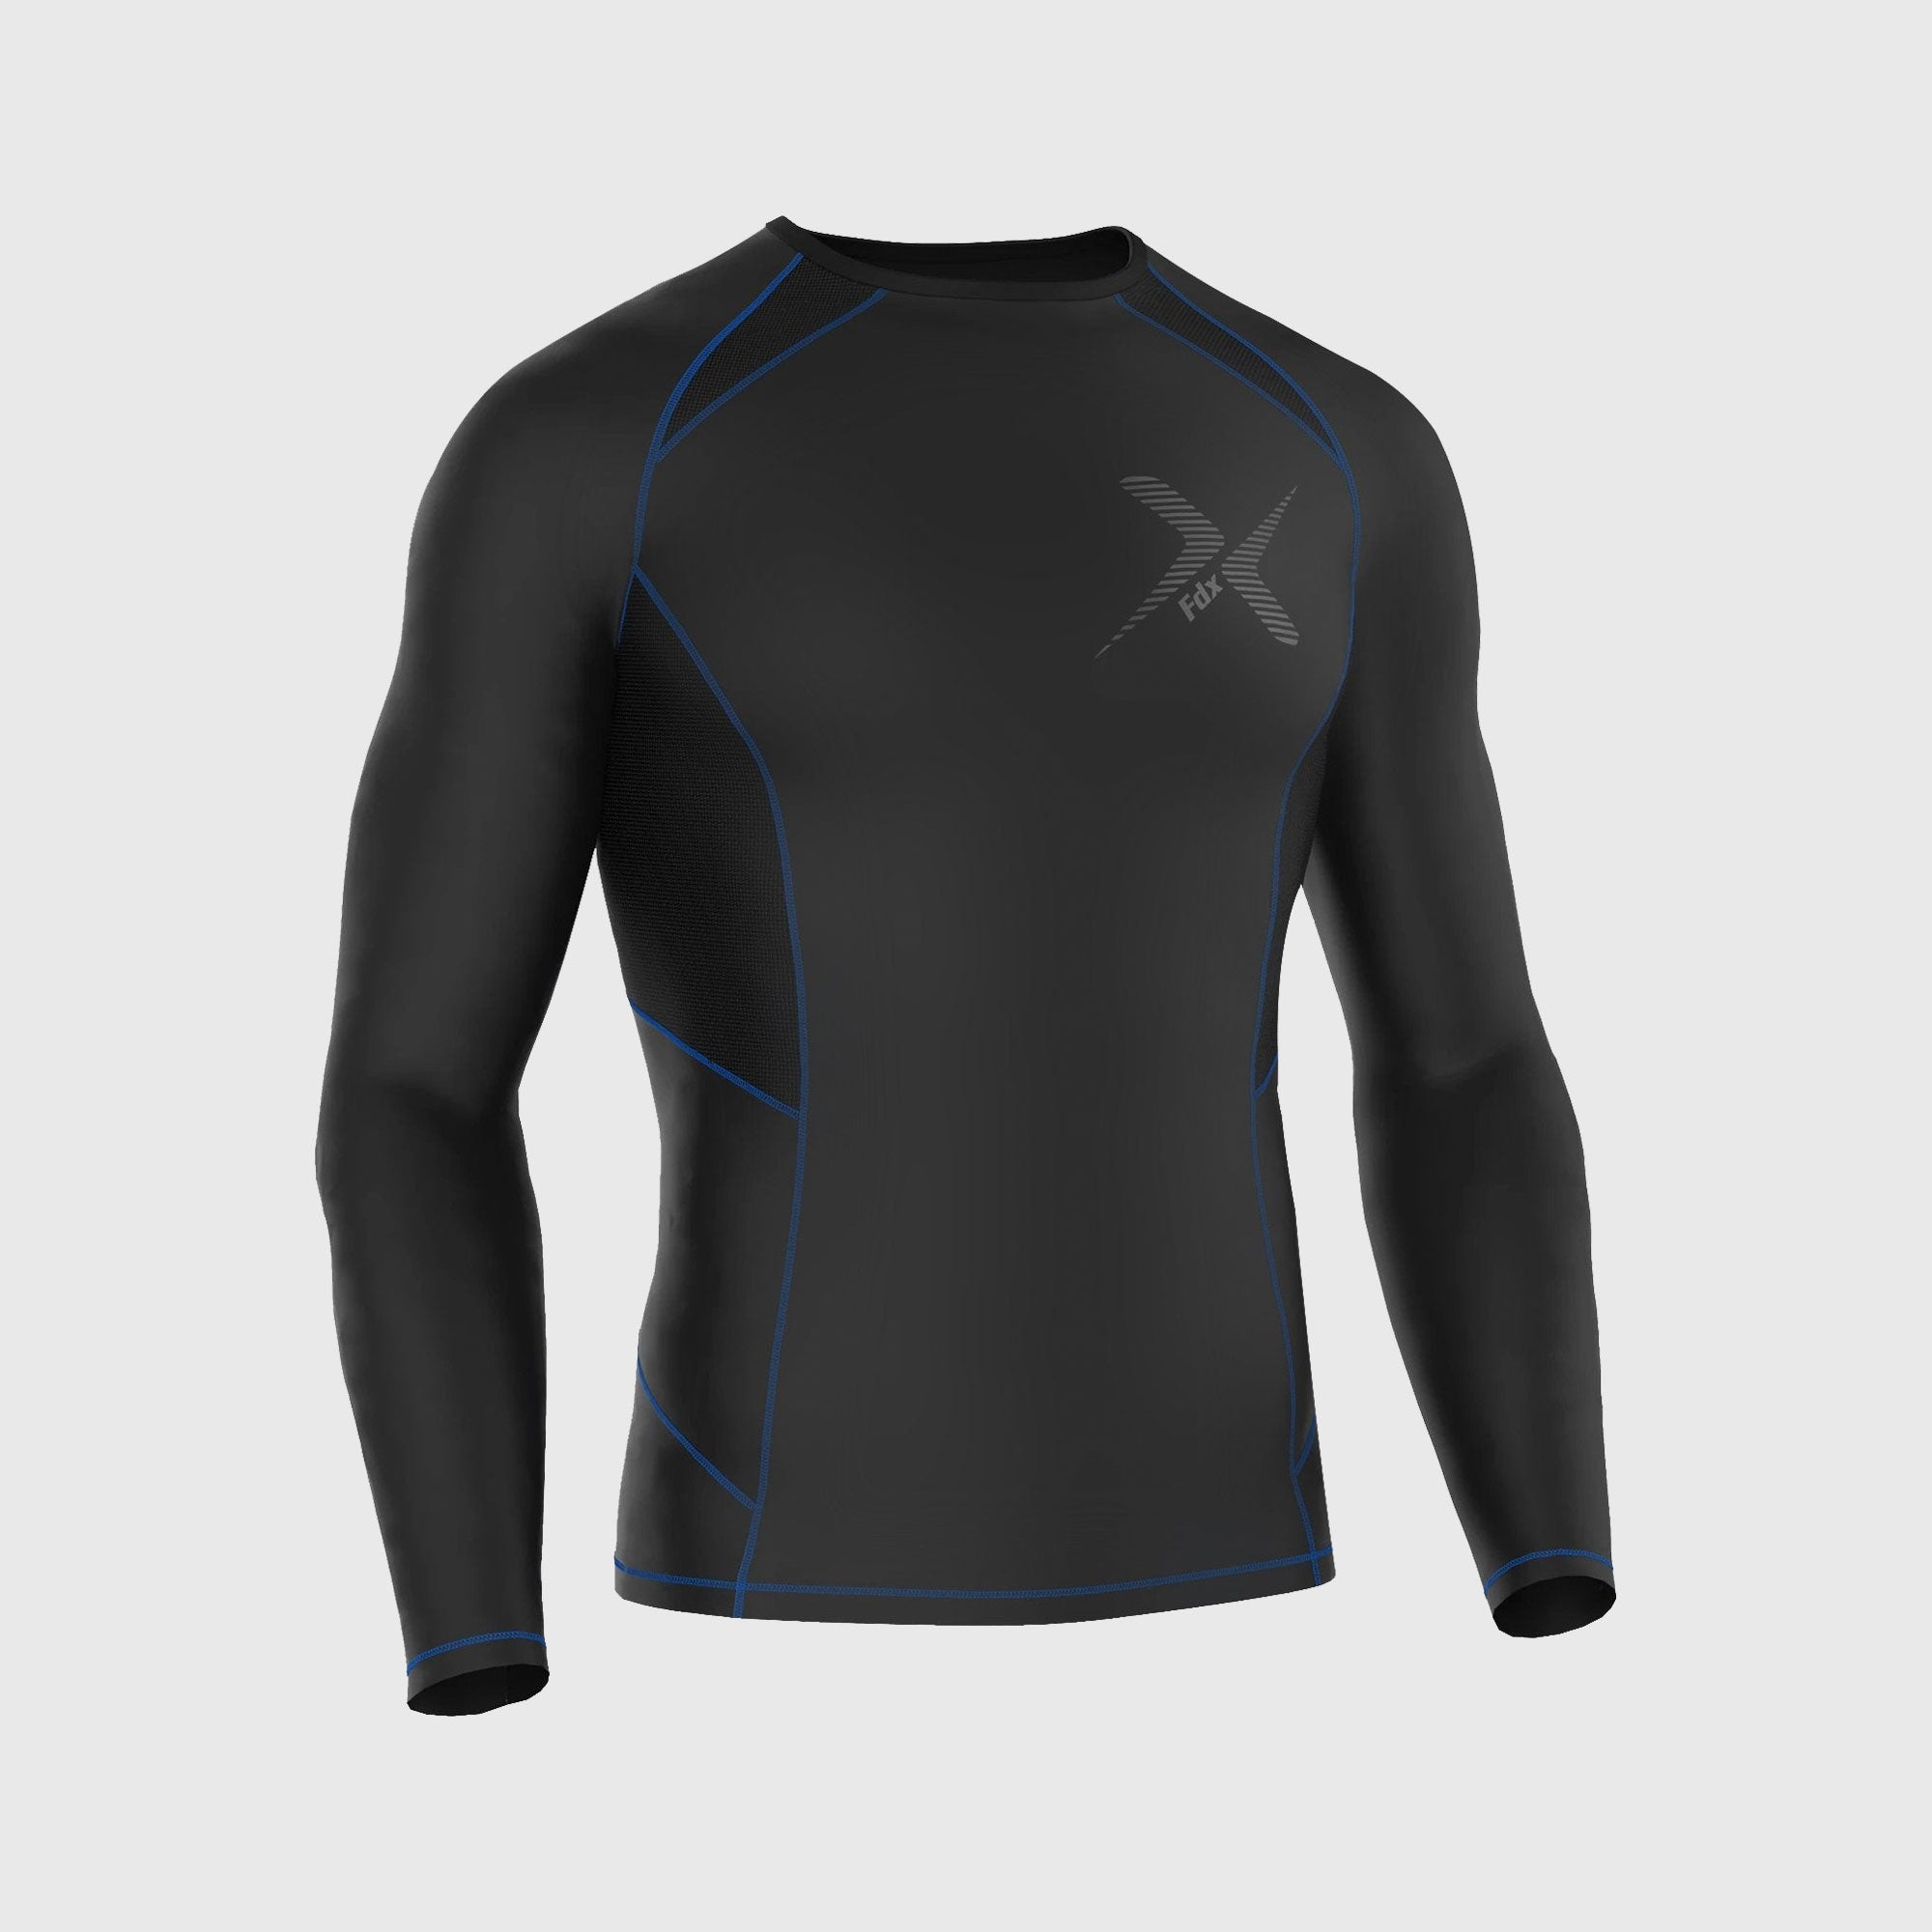 Fdx Recoil Blue Men's Long Sleeve Base Layer Thermal Winter Compression Top